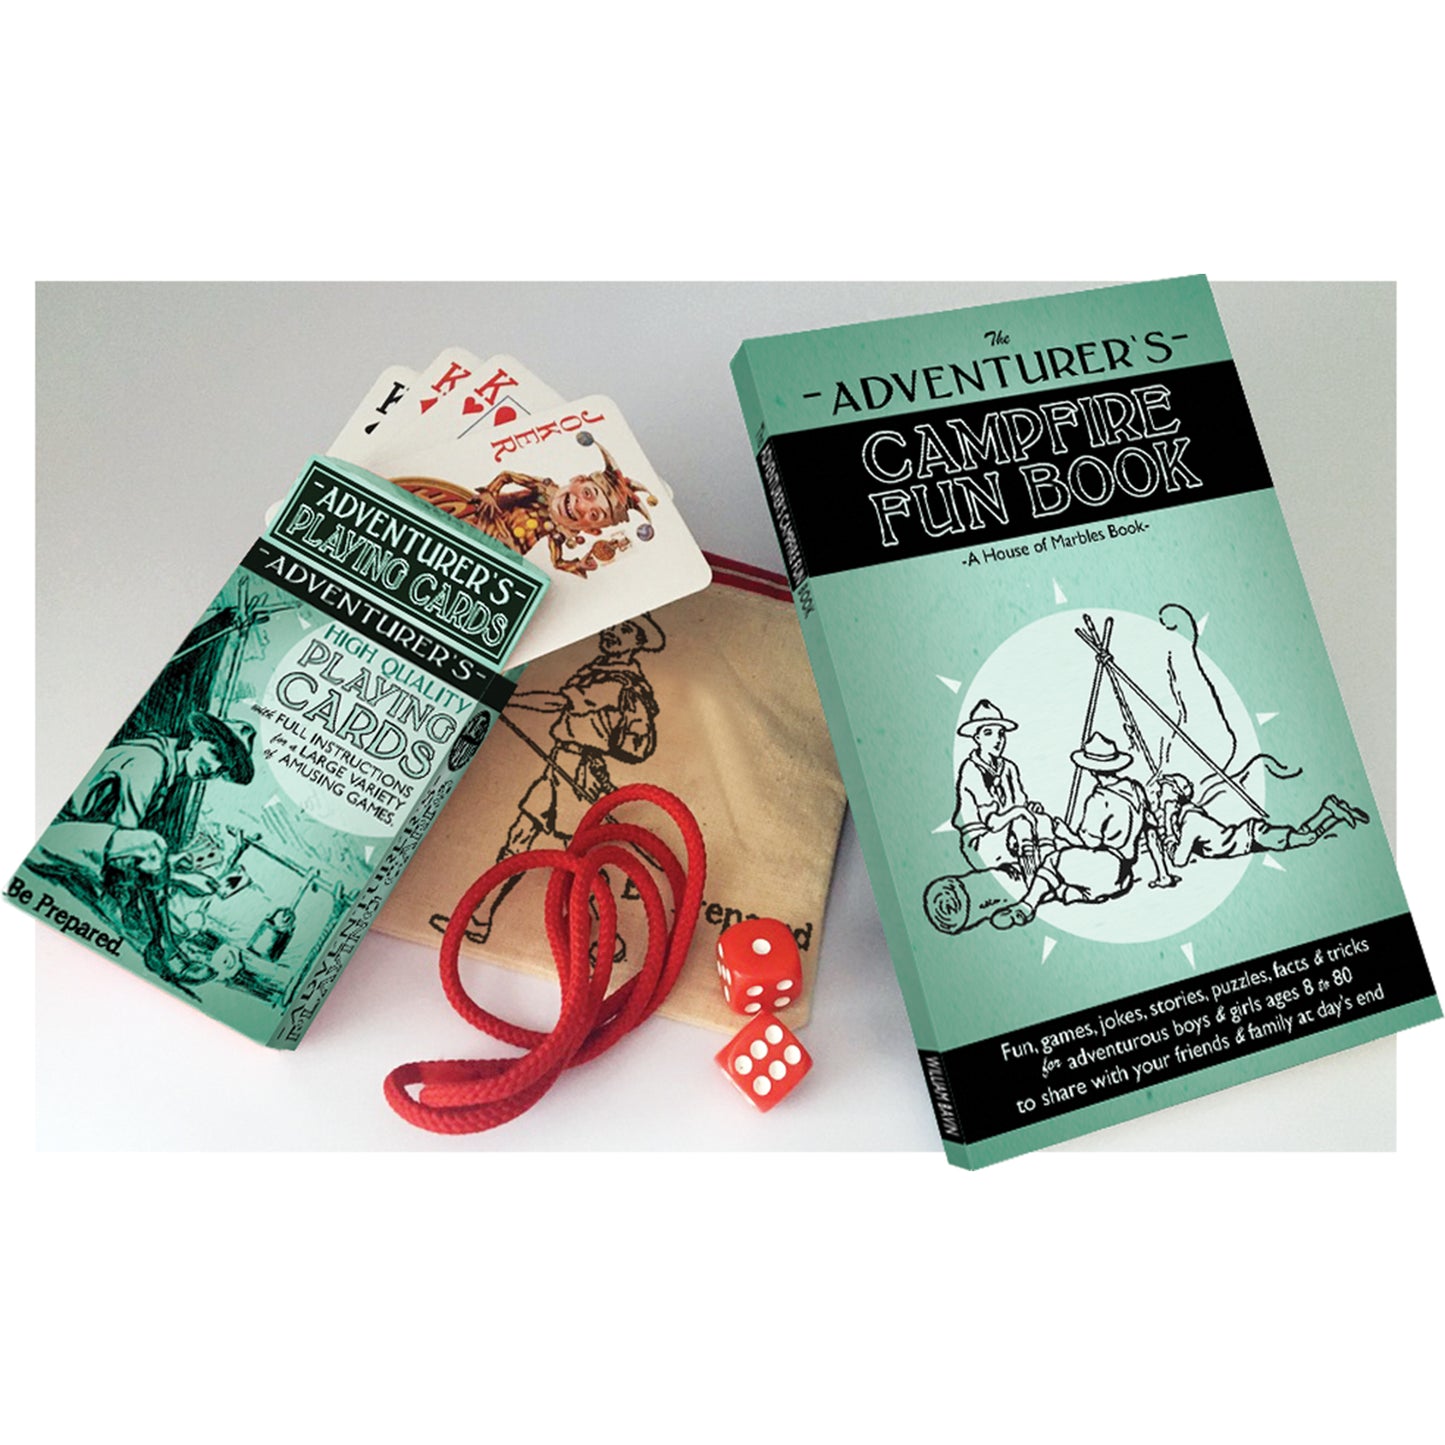 Campfire Fun book, playing cards, dice and string